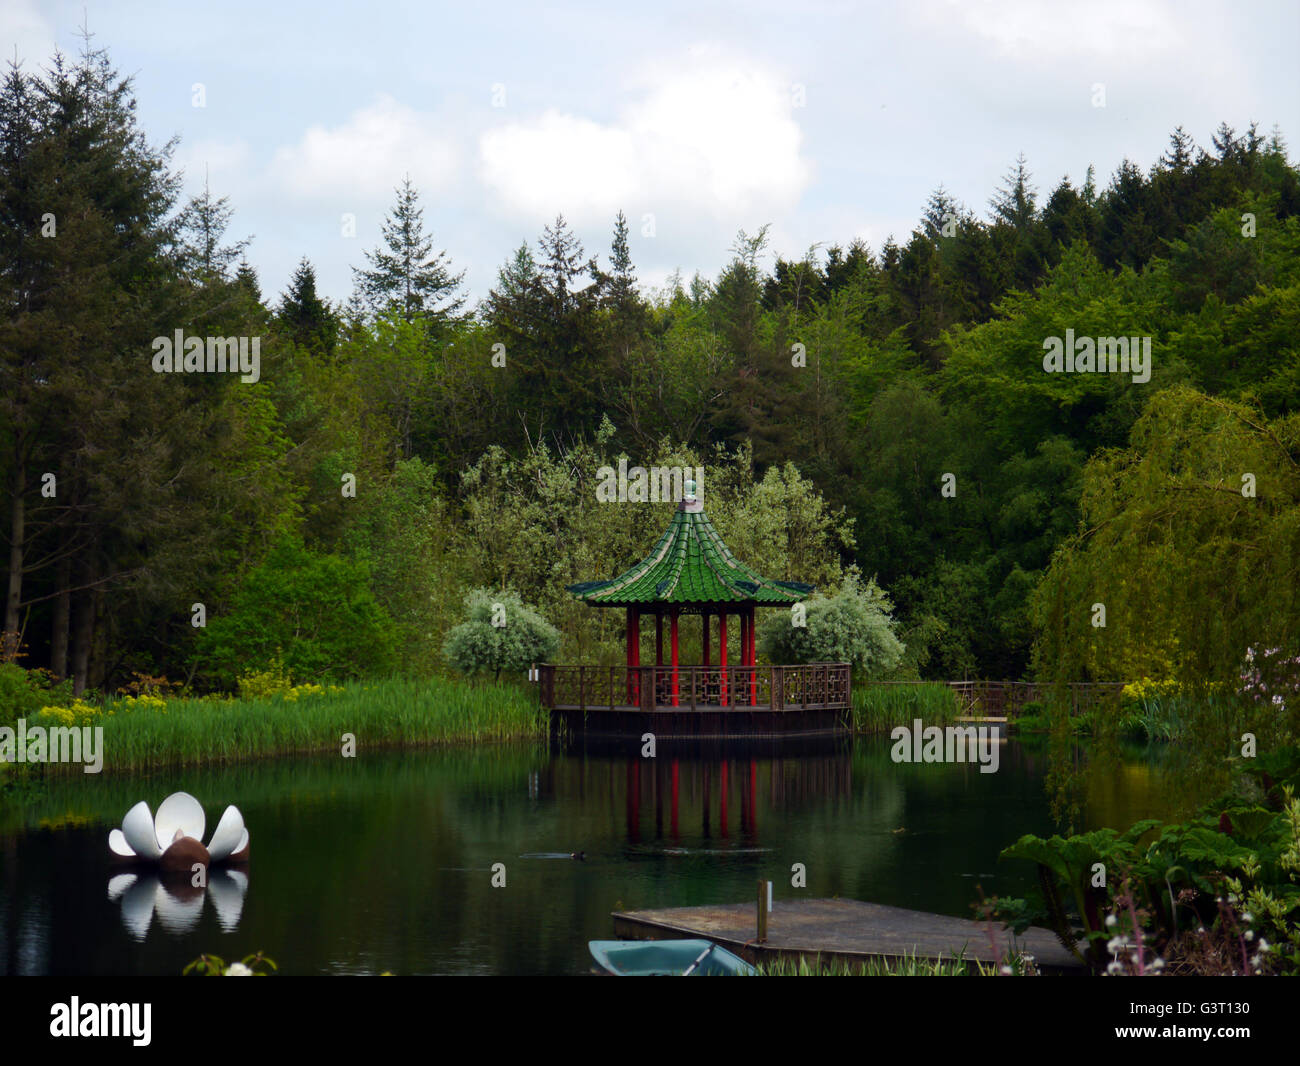 Floating Sculpture and Pagoda on the Lake at the Himalayan Garden & Sculpture Park, North Yorkshire, England UK. Stock Photo